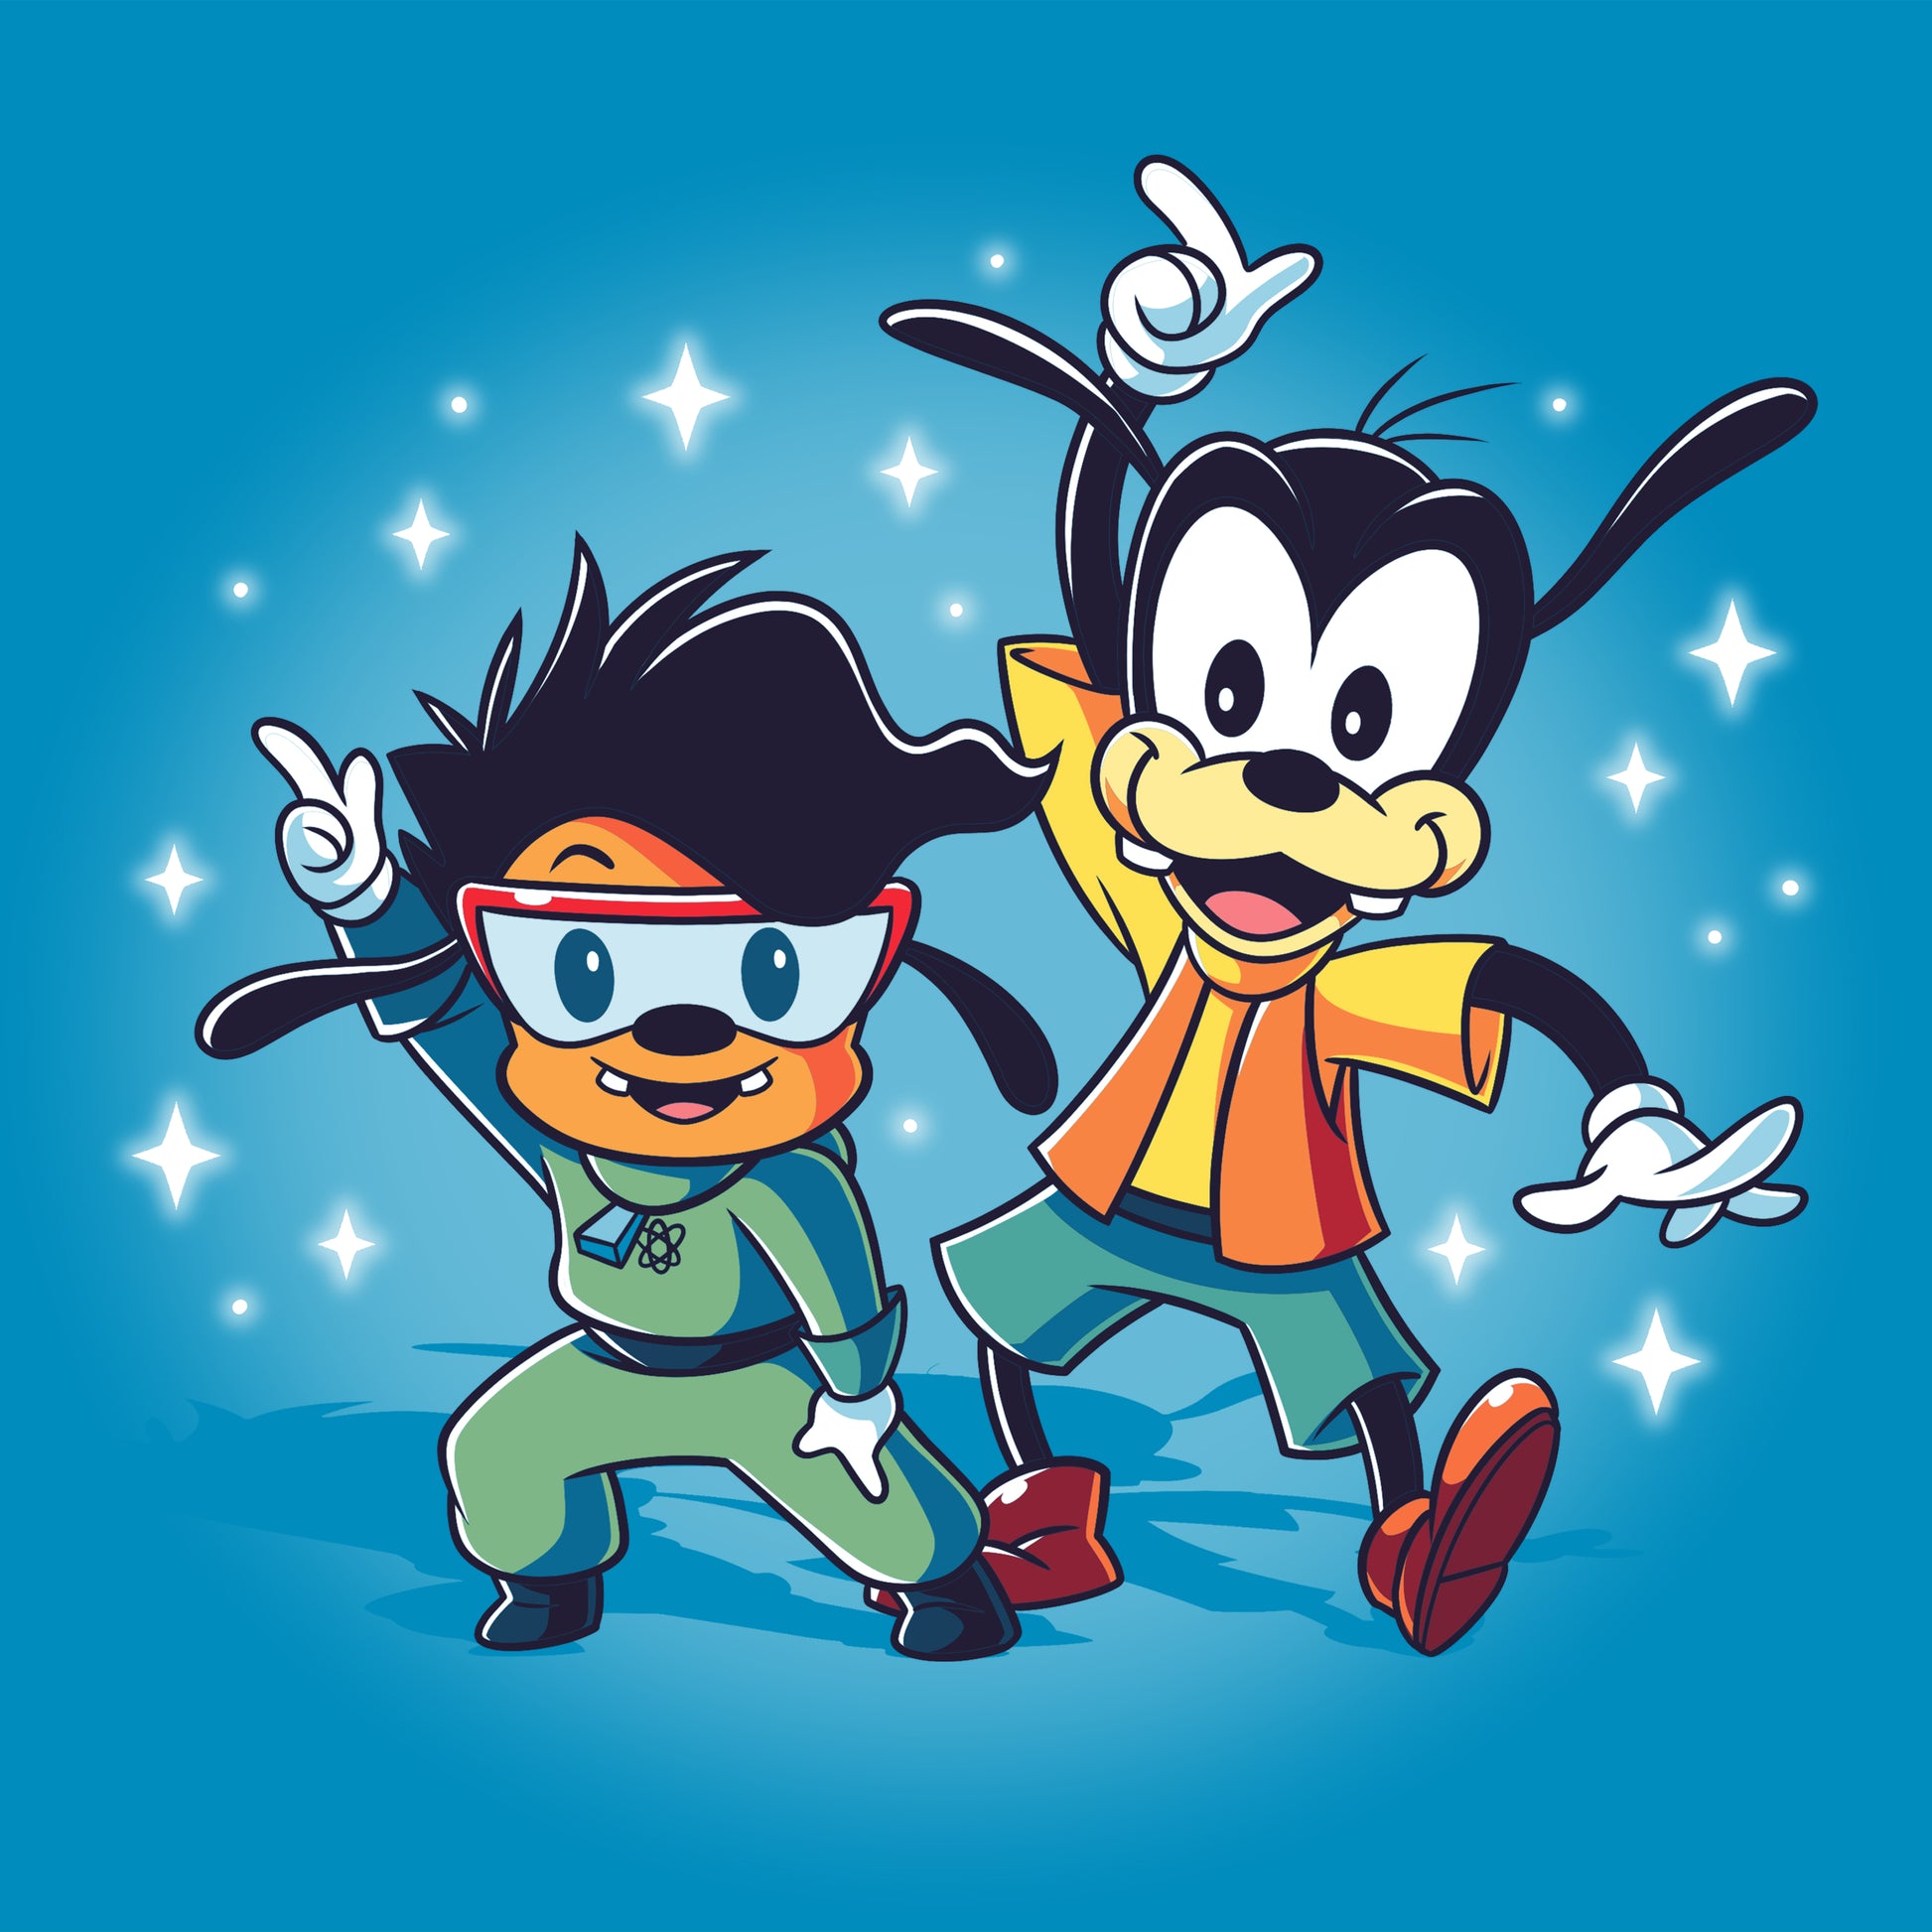 Two cartoon characters are posing in front of a cobalt blue background promoting the A Goofy Movie by Disney.